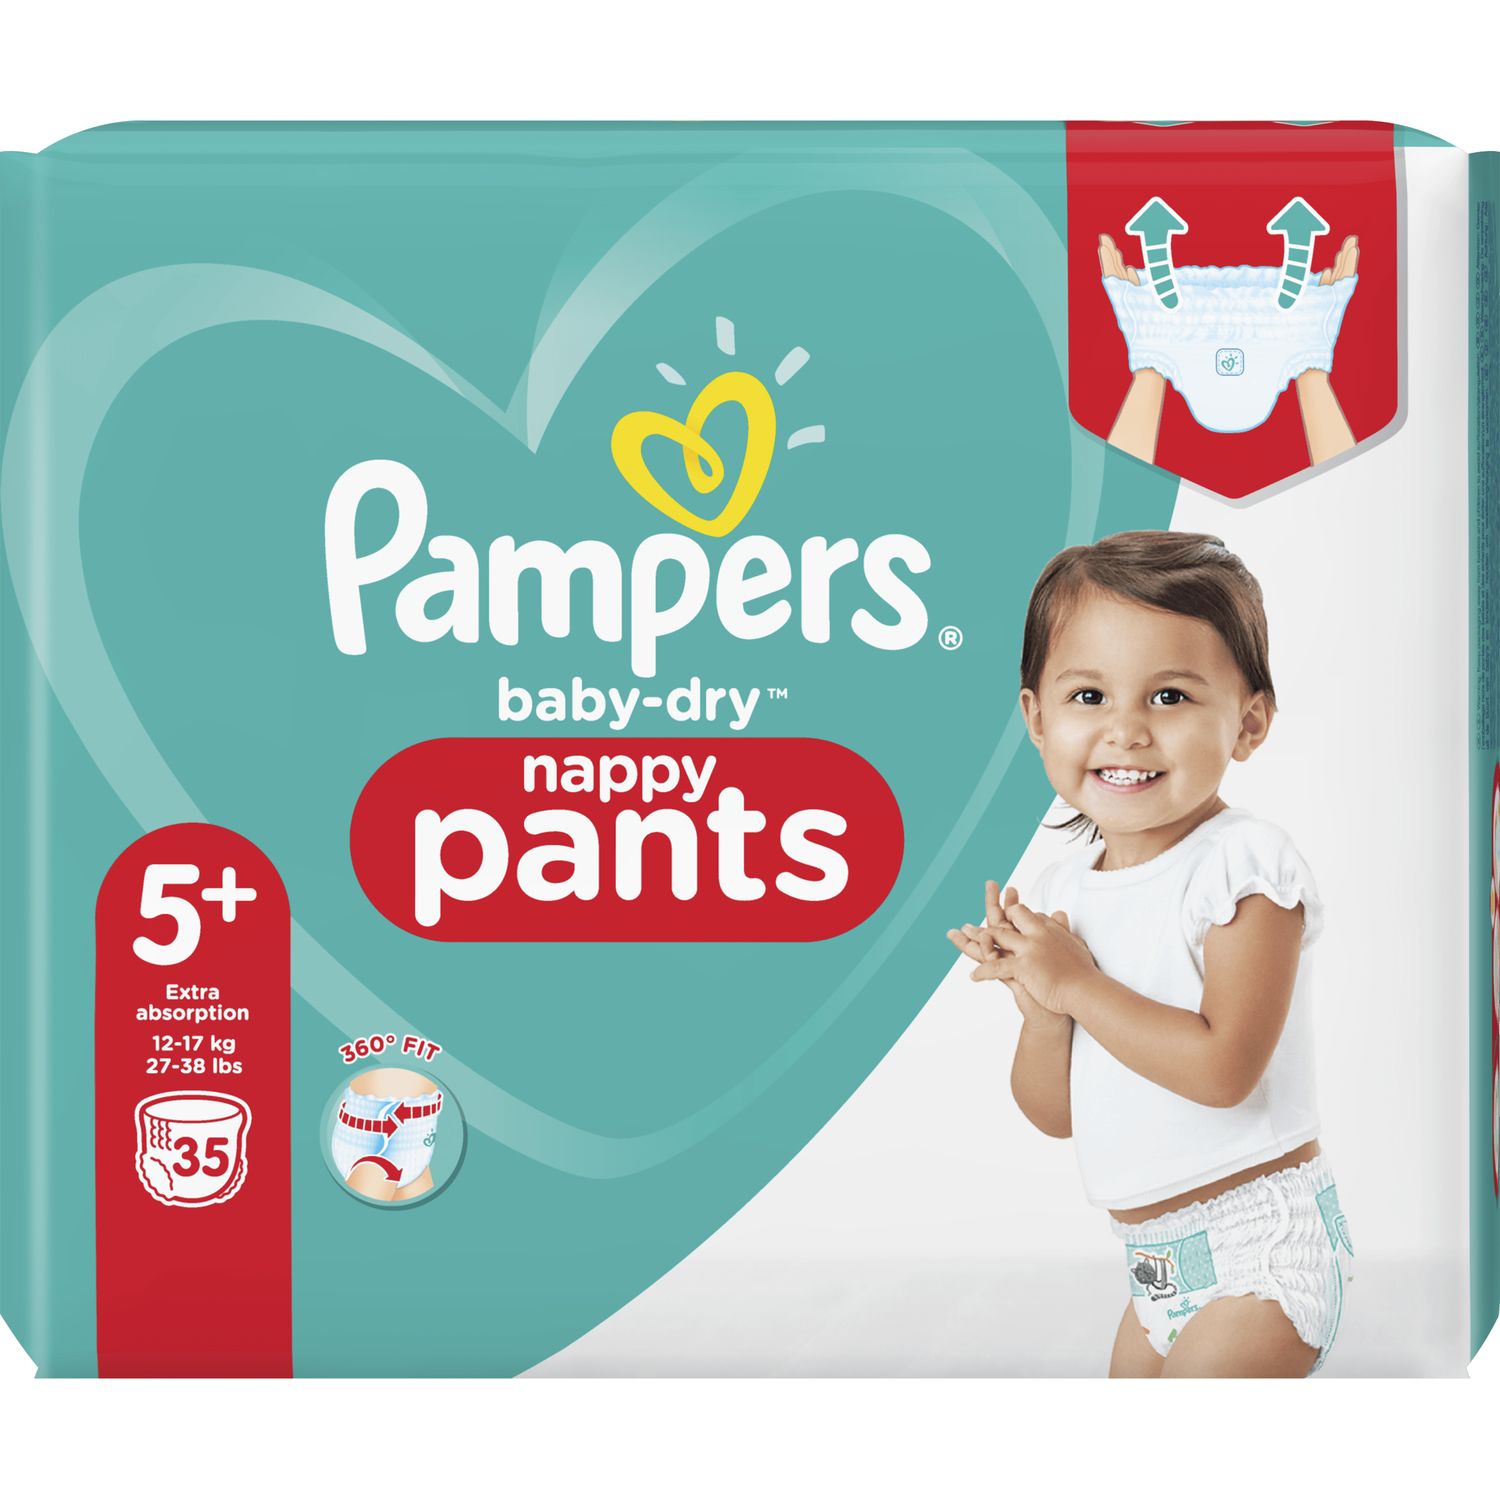 AUCHAN BABY Couches-culottes taille 5 (12-18 kg)